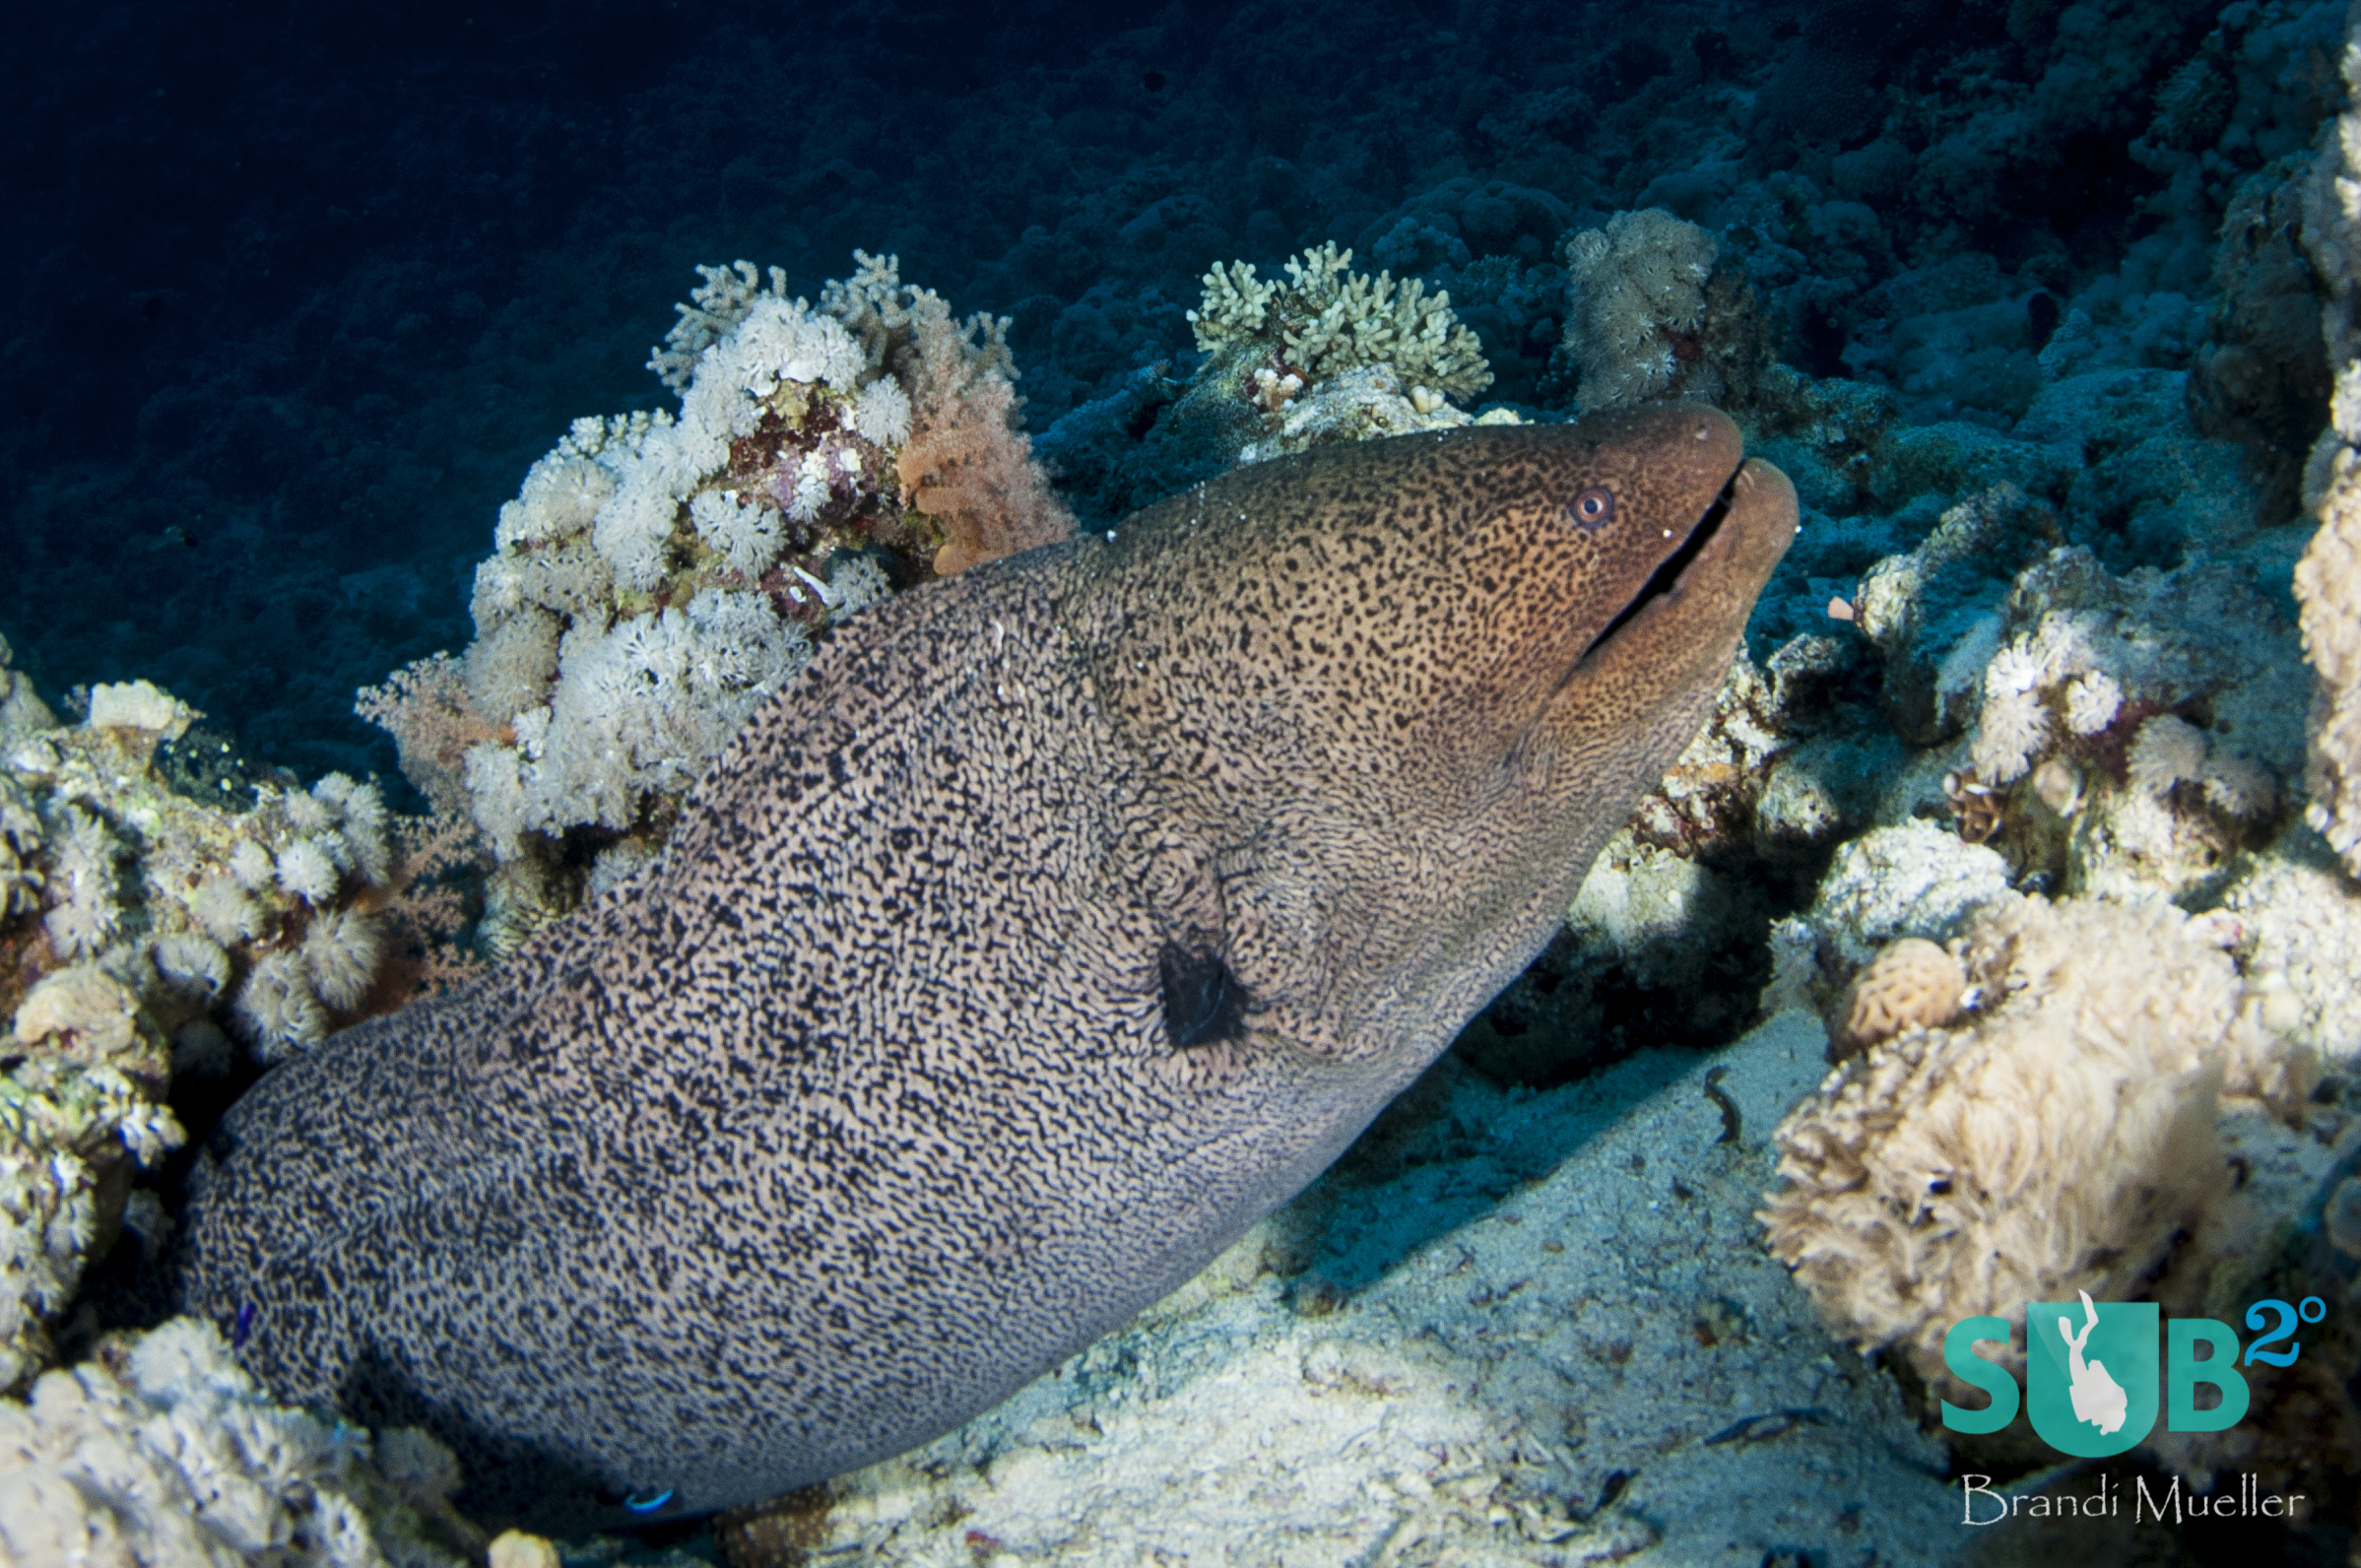 The giant moray eel (Gymnothorax javanicus) is the surly old man of the reef.